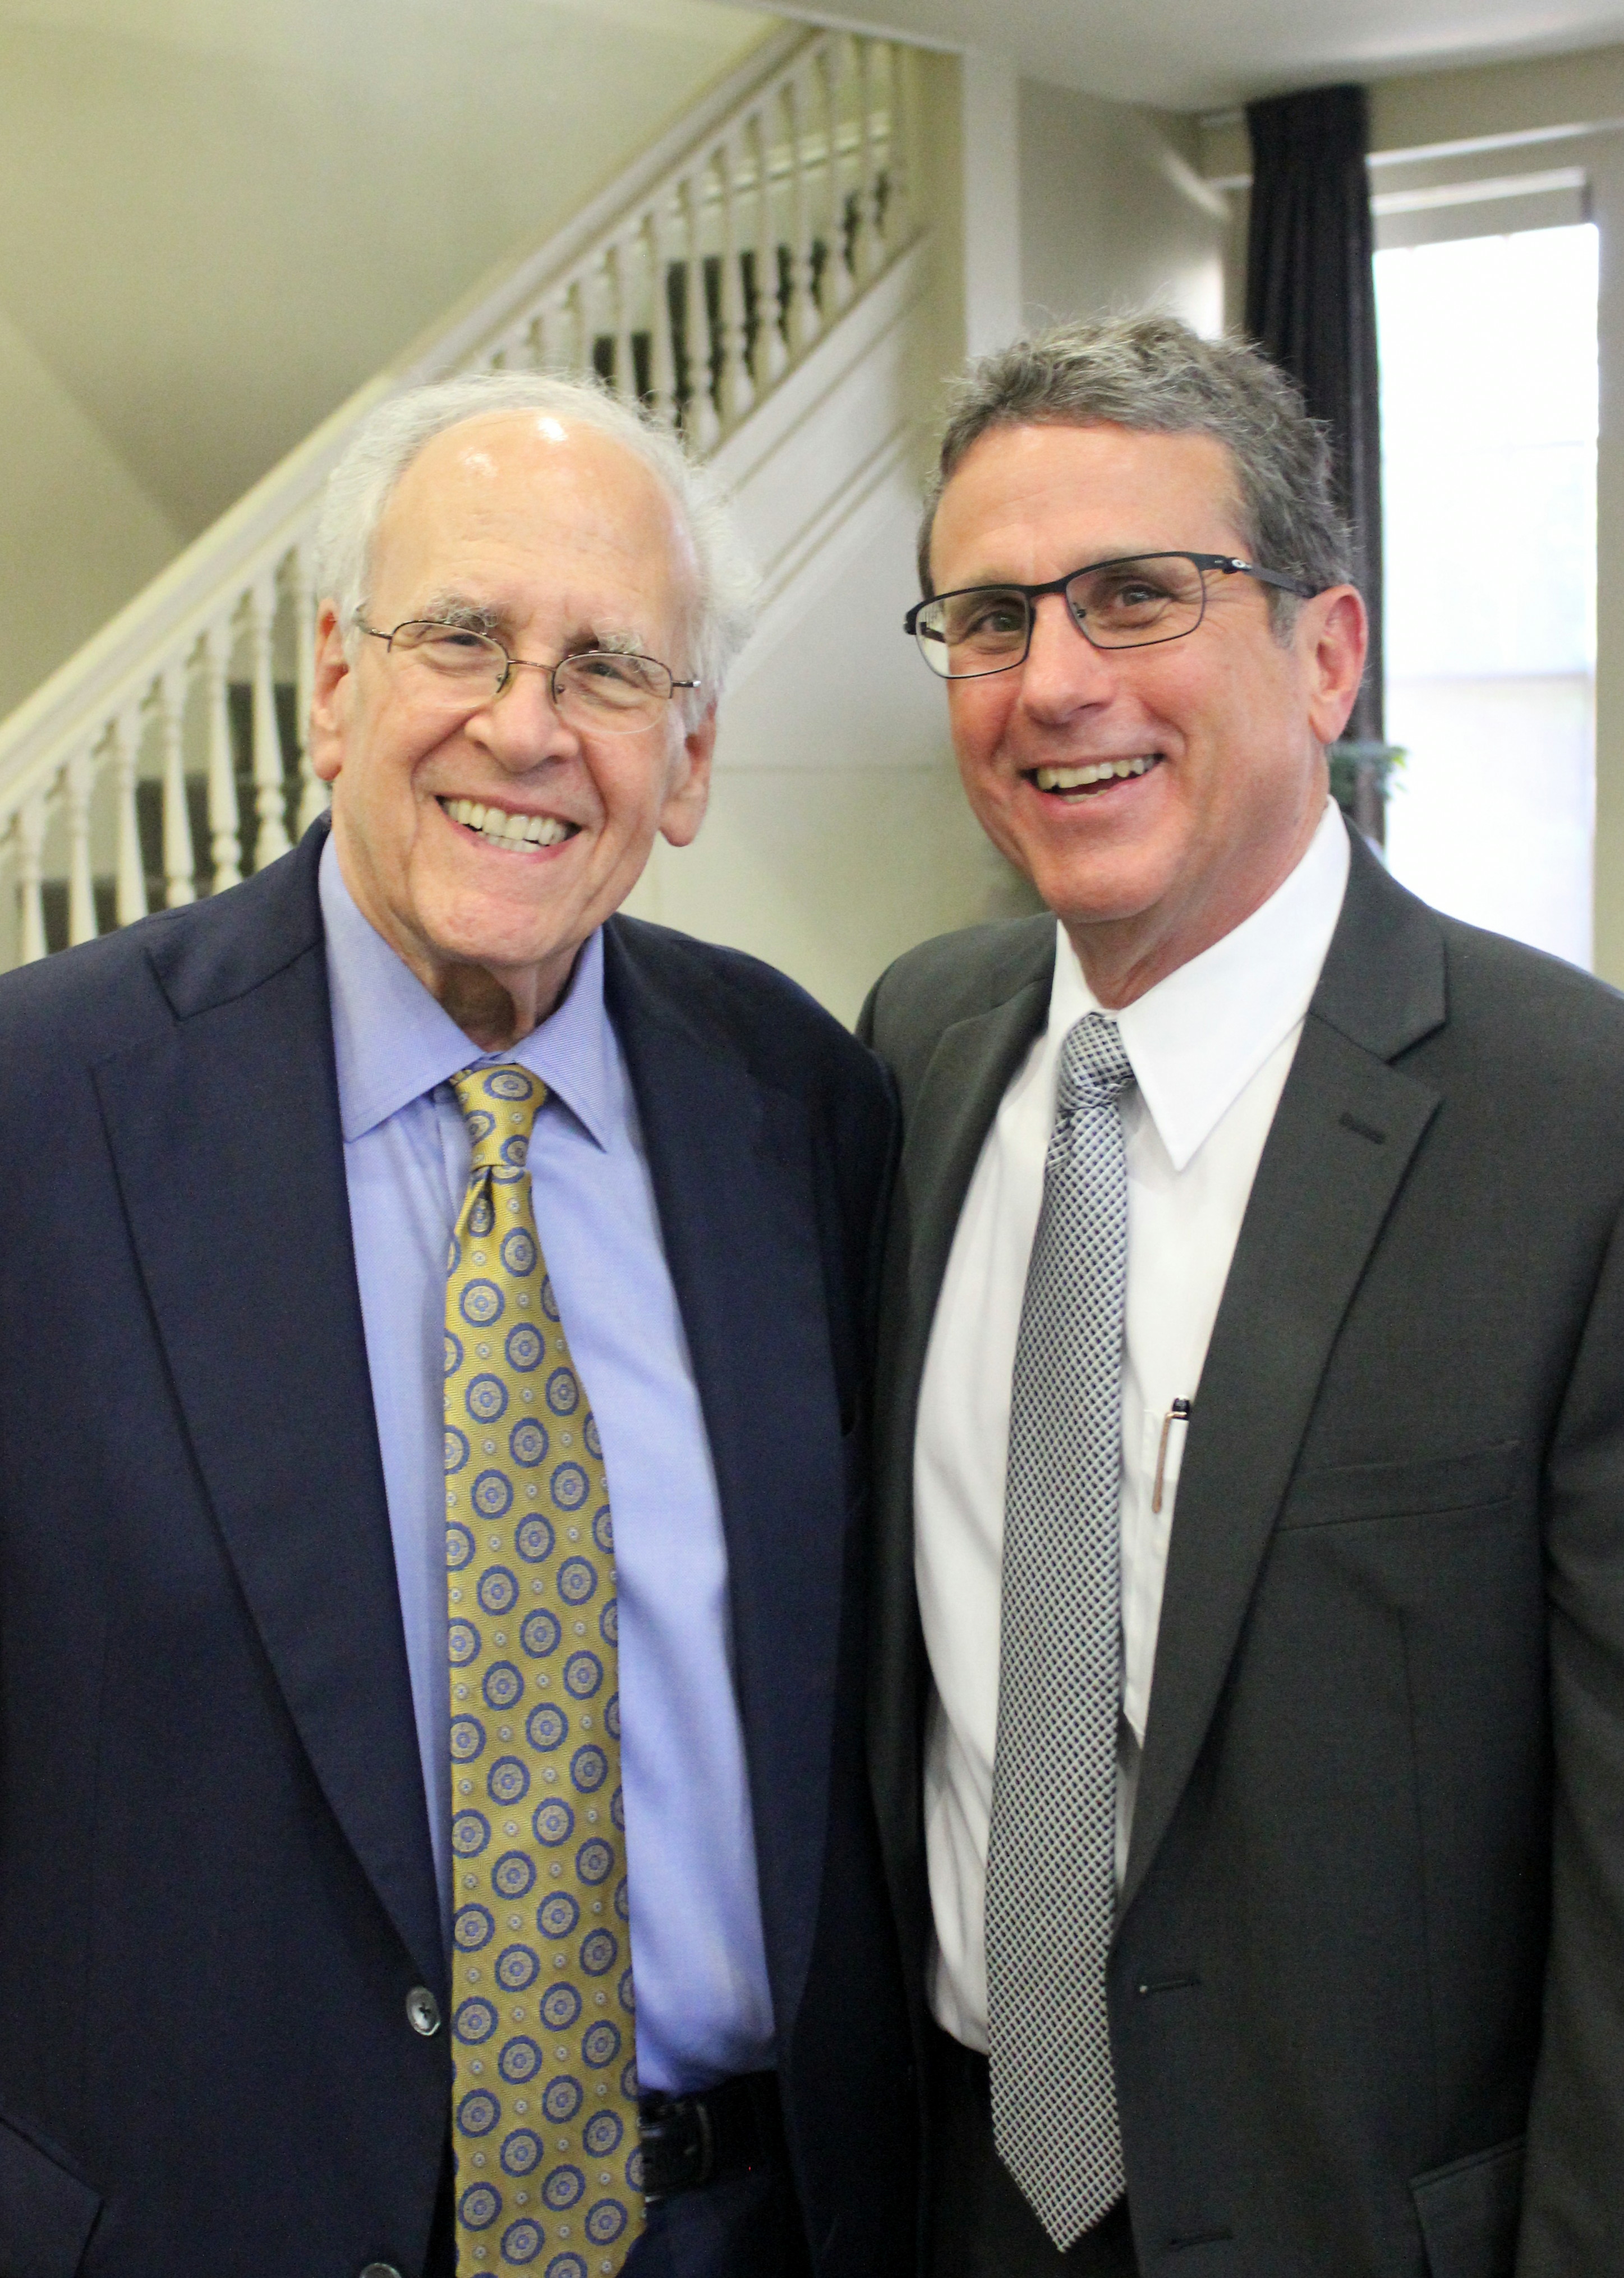 Drs. Loren Roth and David Lewis at the 18th Annual Department of Psychiatry Research Day